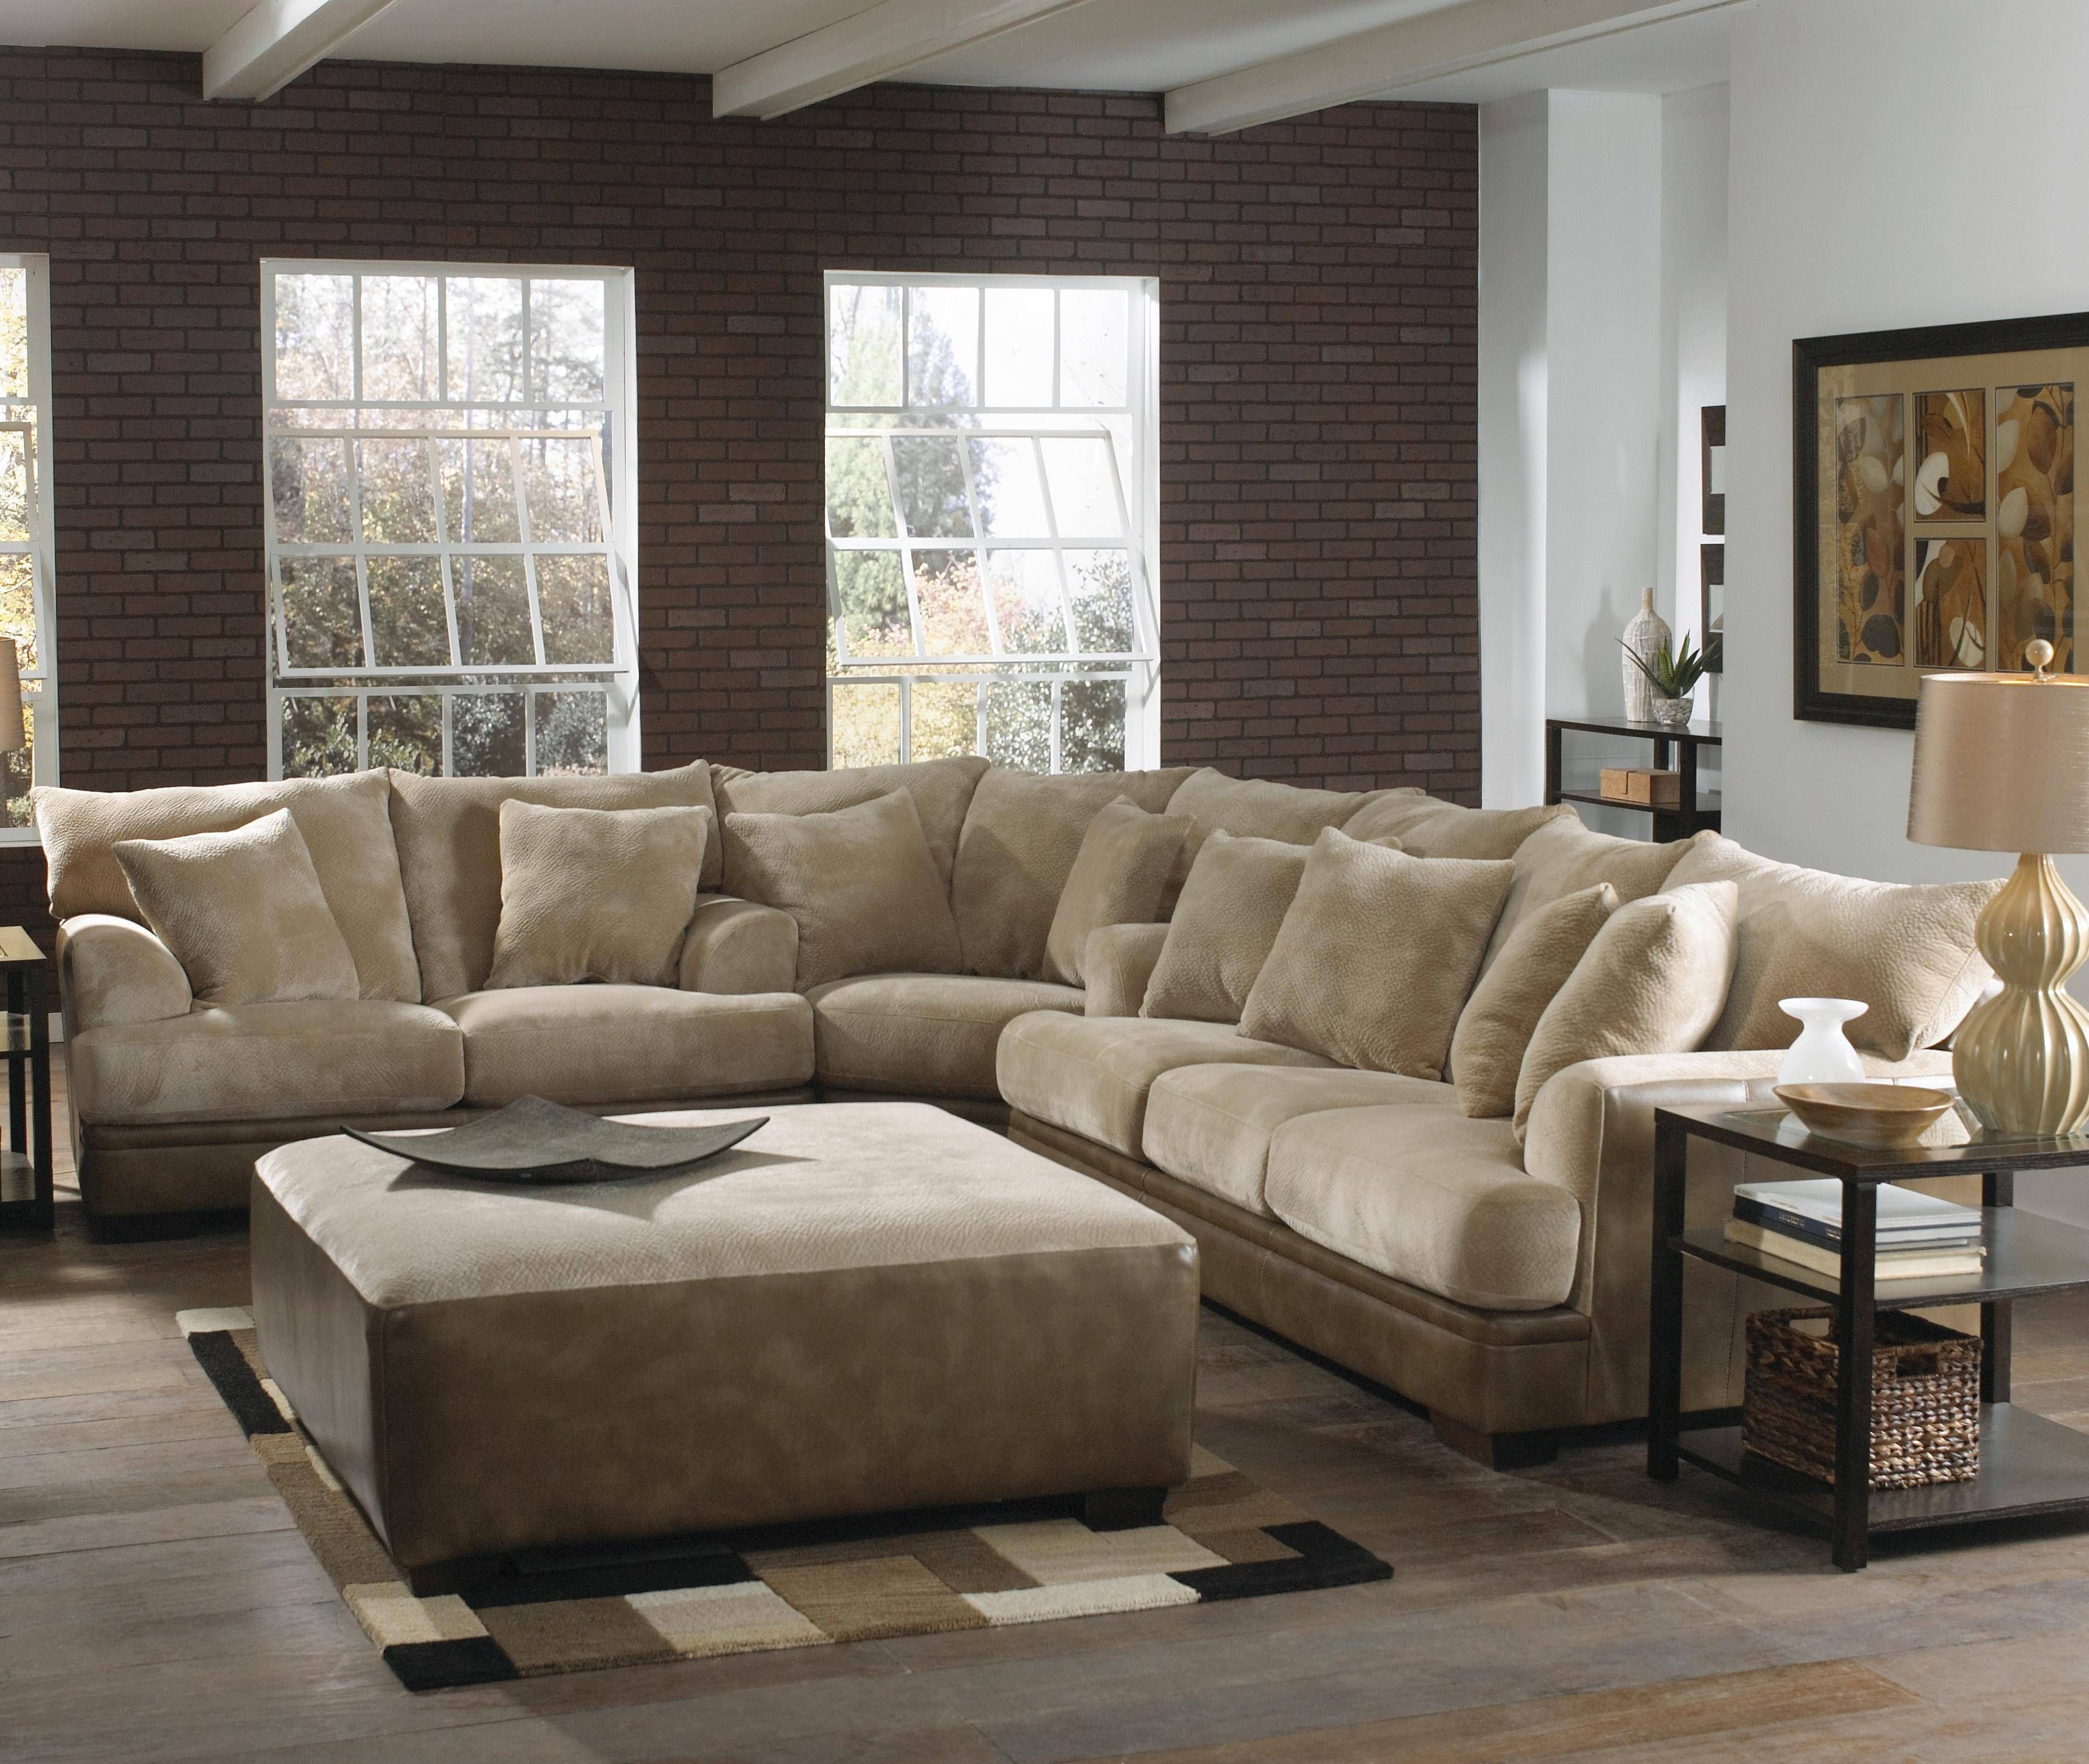 Sofas Center : Superb Extra Large Sectional Sofas Withise Part Bob With Extra Large Sectional Sofas (View 22 of 30)